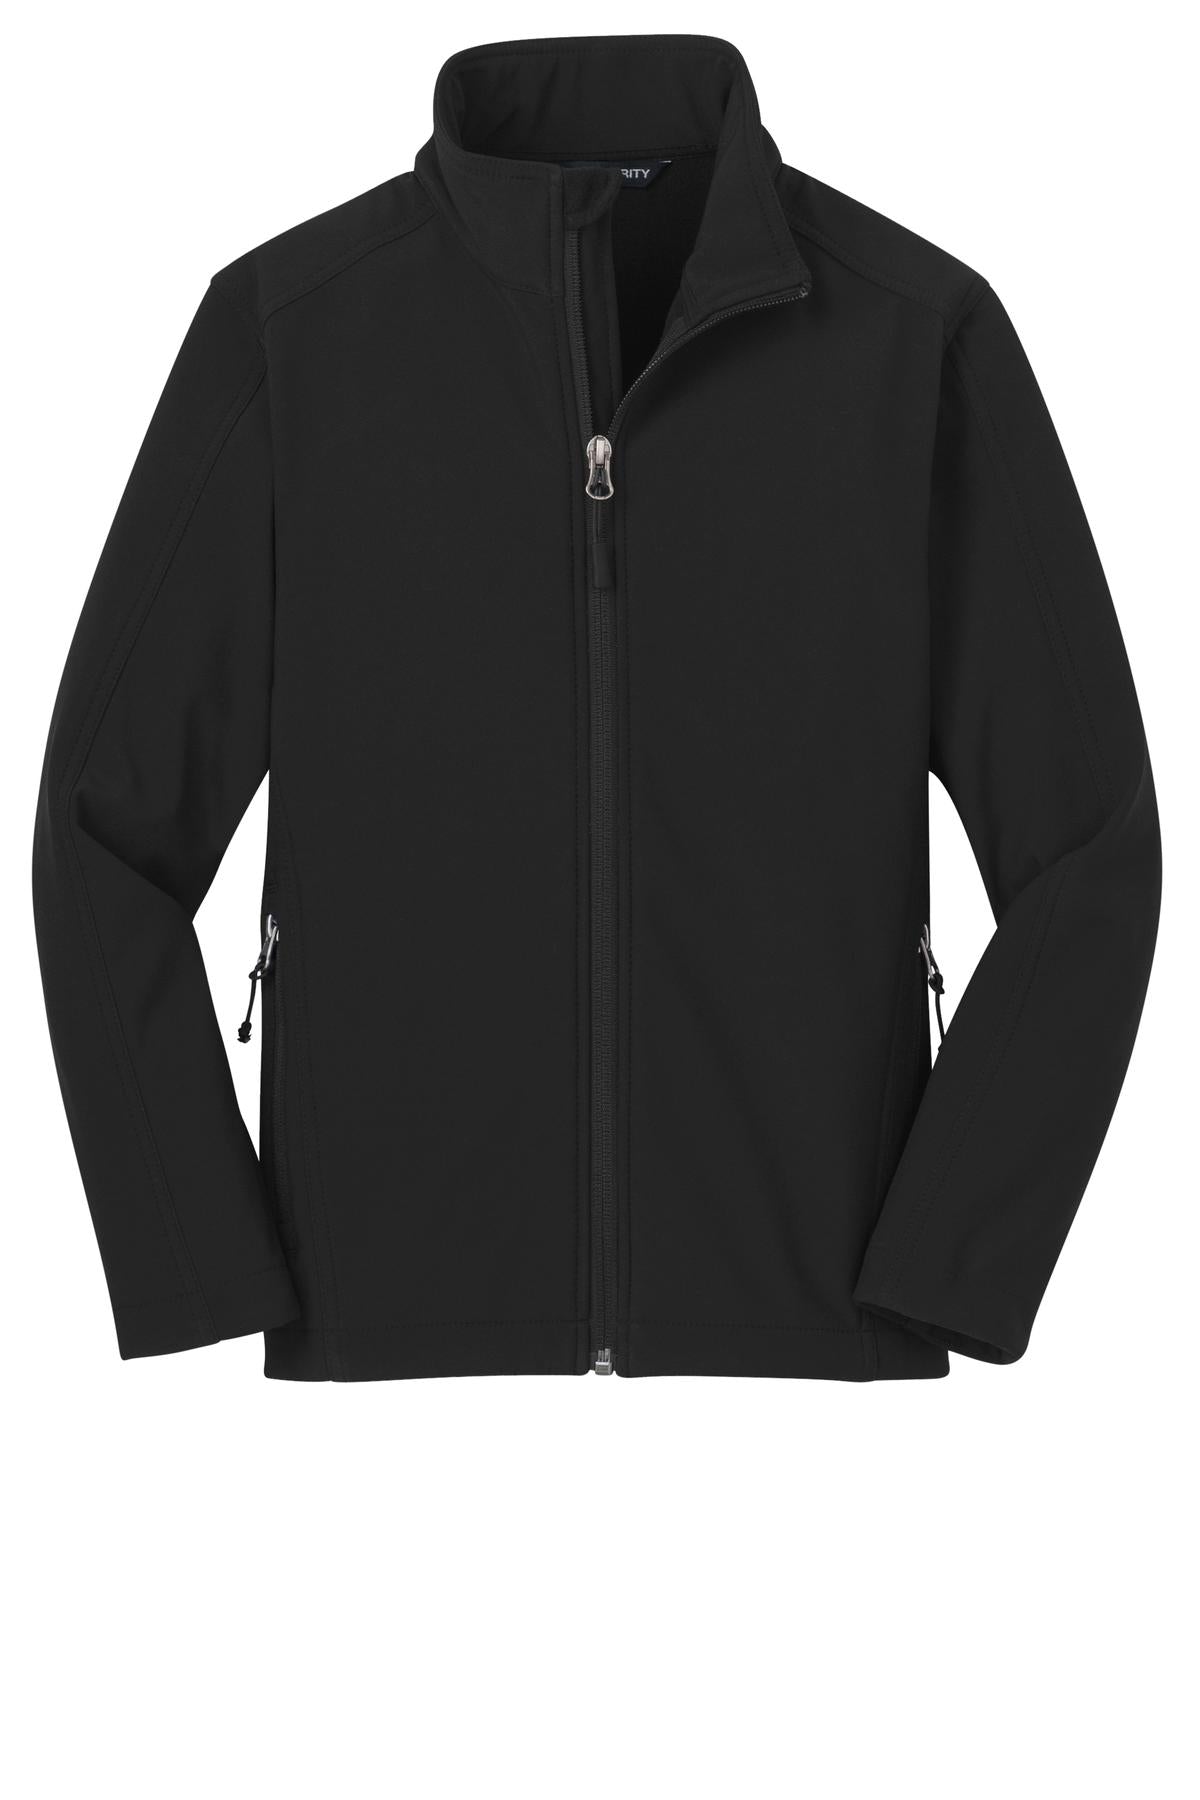 Port Authority Youth Core Soft Shell Jacket. Y317